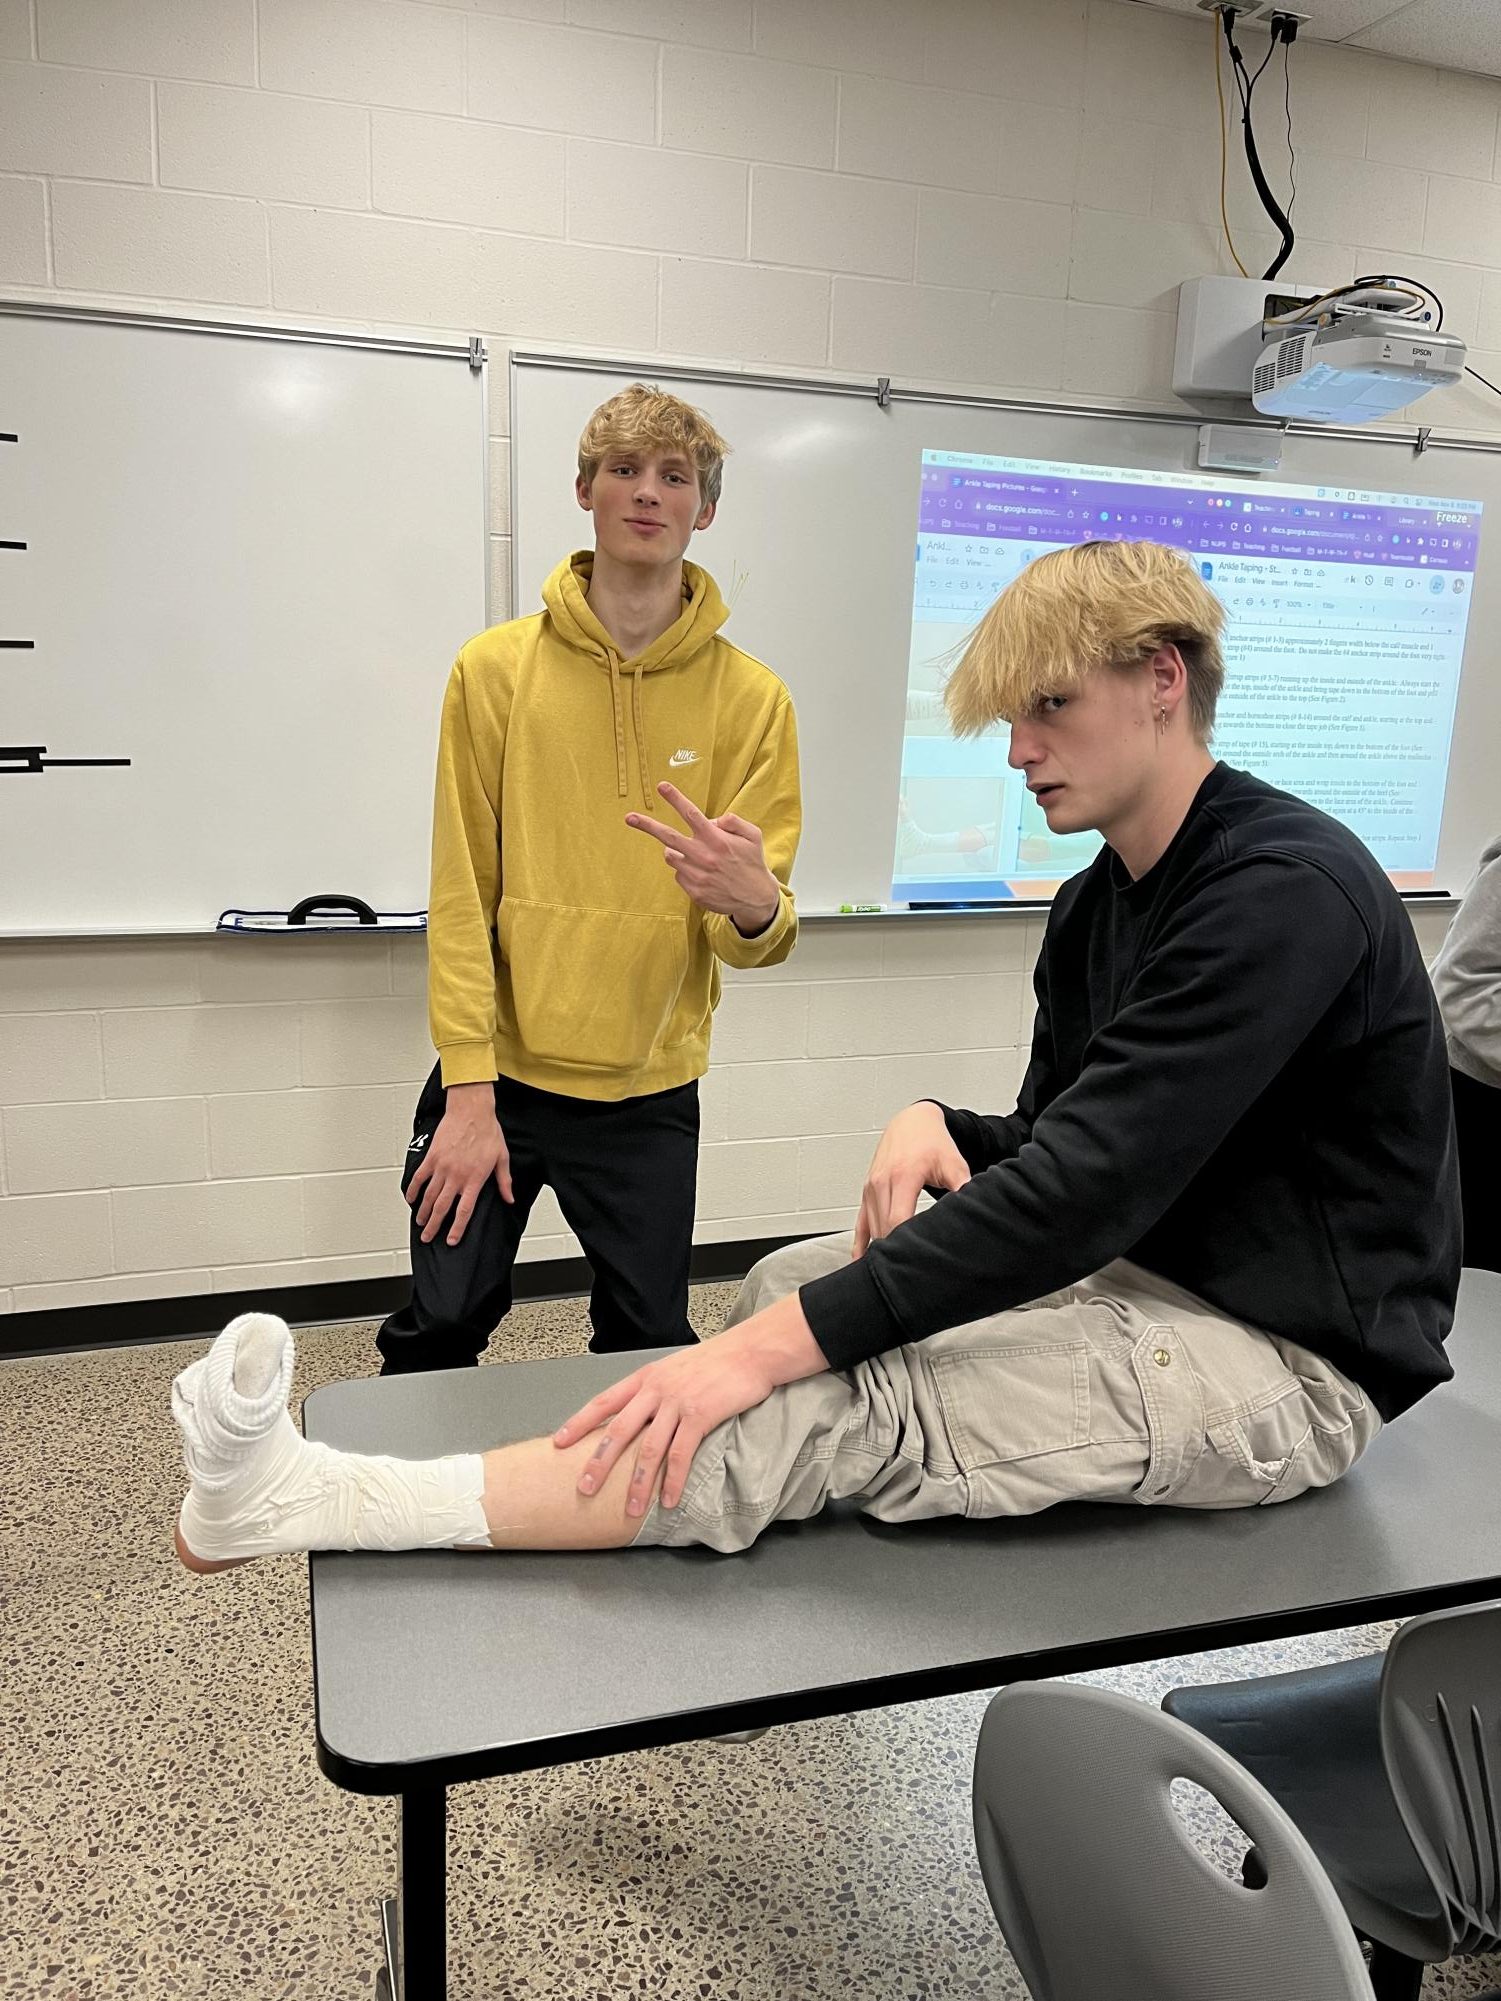 Seniors at work: Nate Firle just finished taping Tallak Rakowskis ankle.